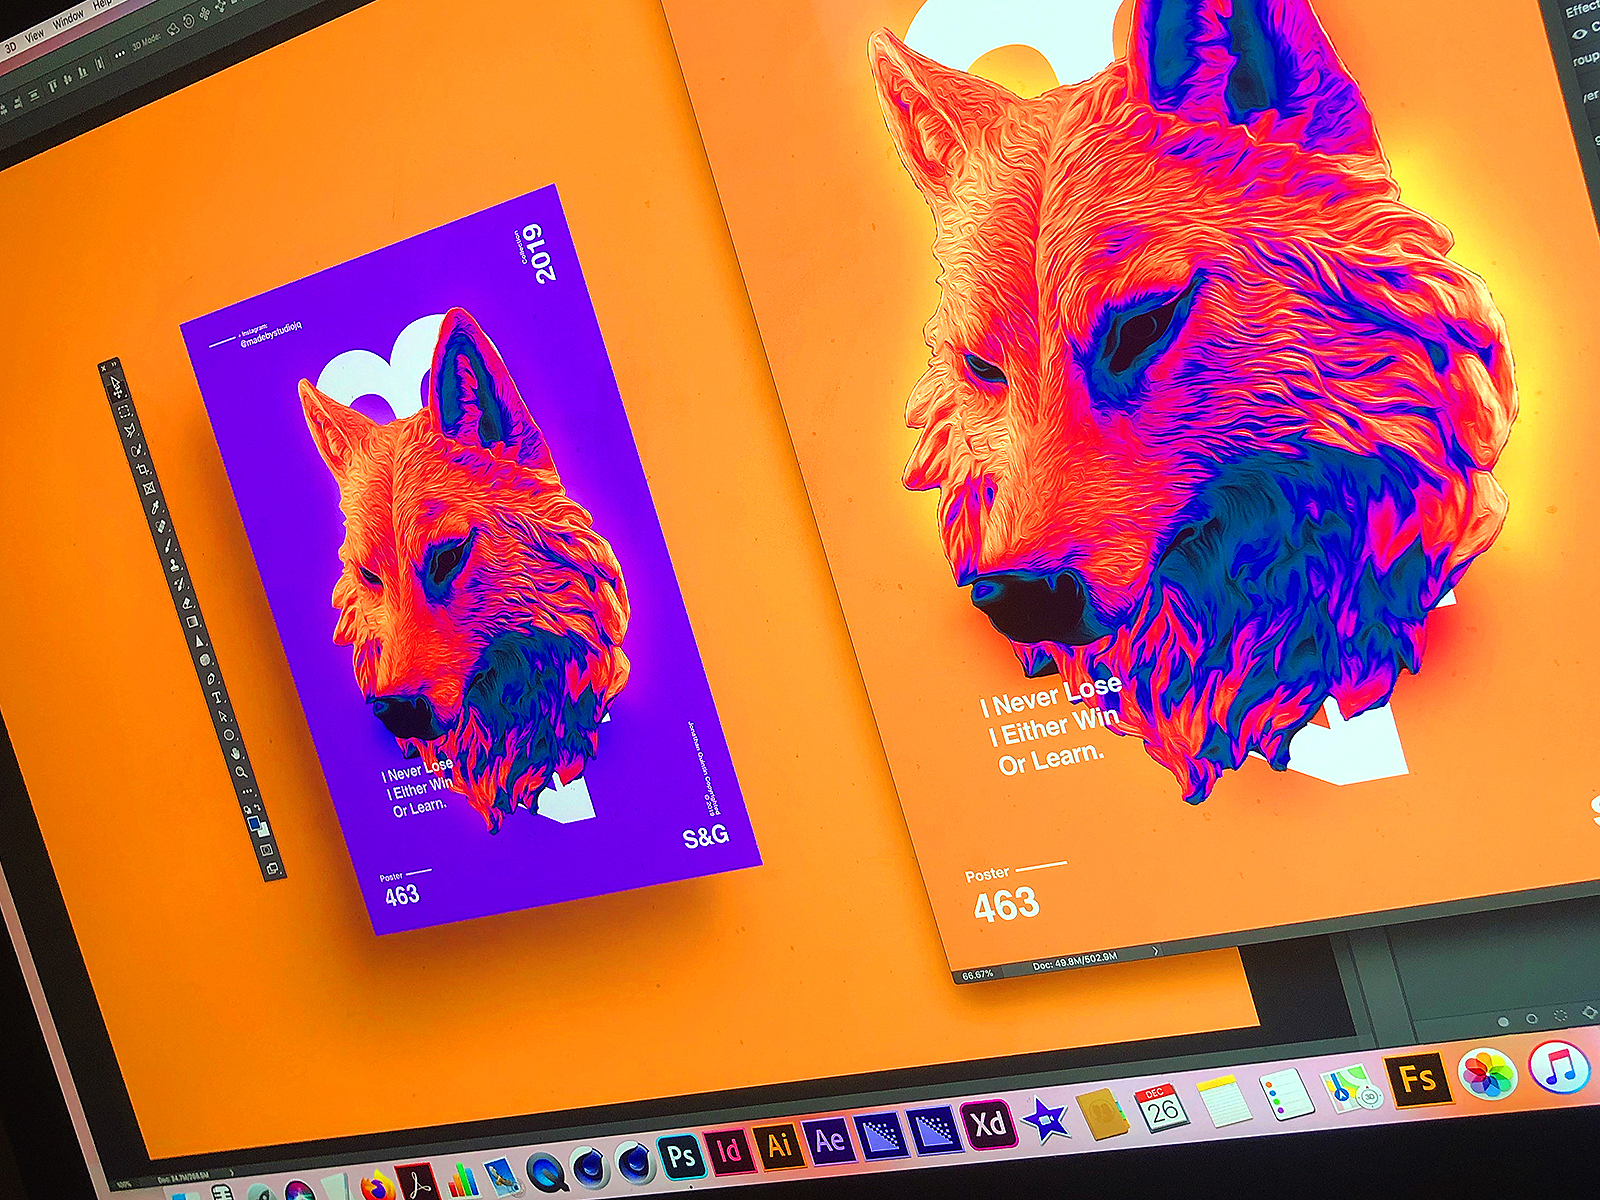 SNEAK PEEK - I Never Lose. I Either Win Or Learn. art poster art poster a day adobe gradient colour wolf illustration photoshop poster